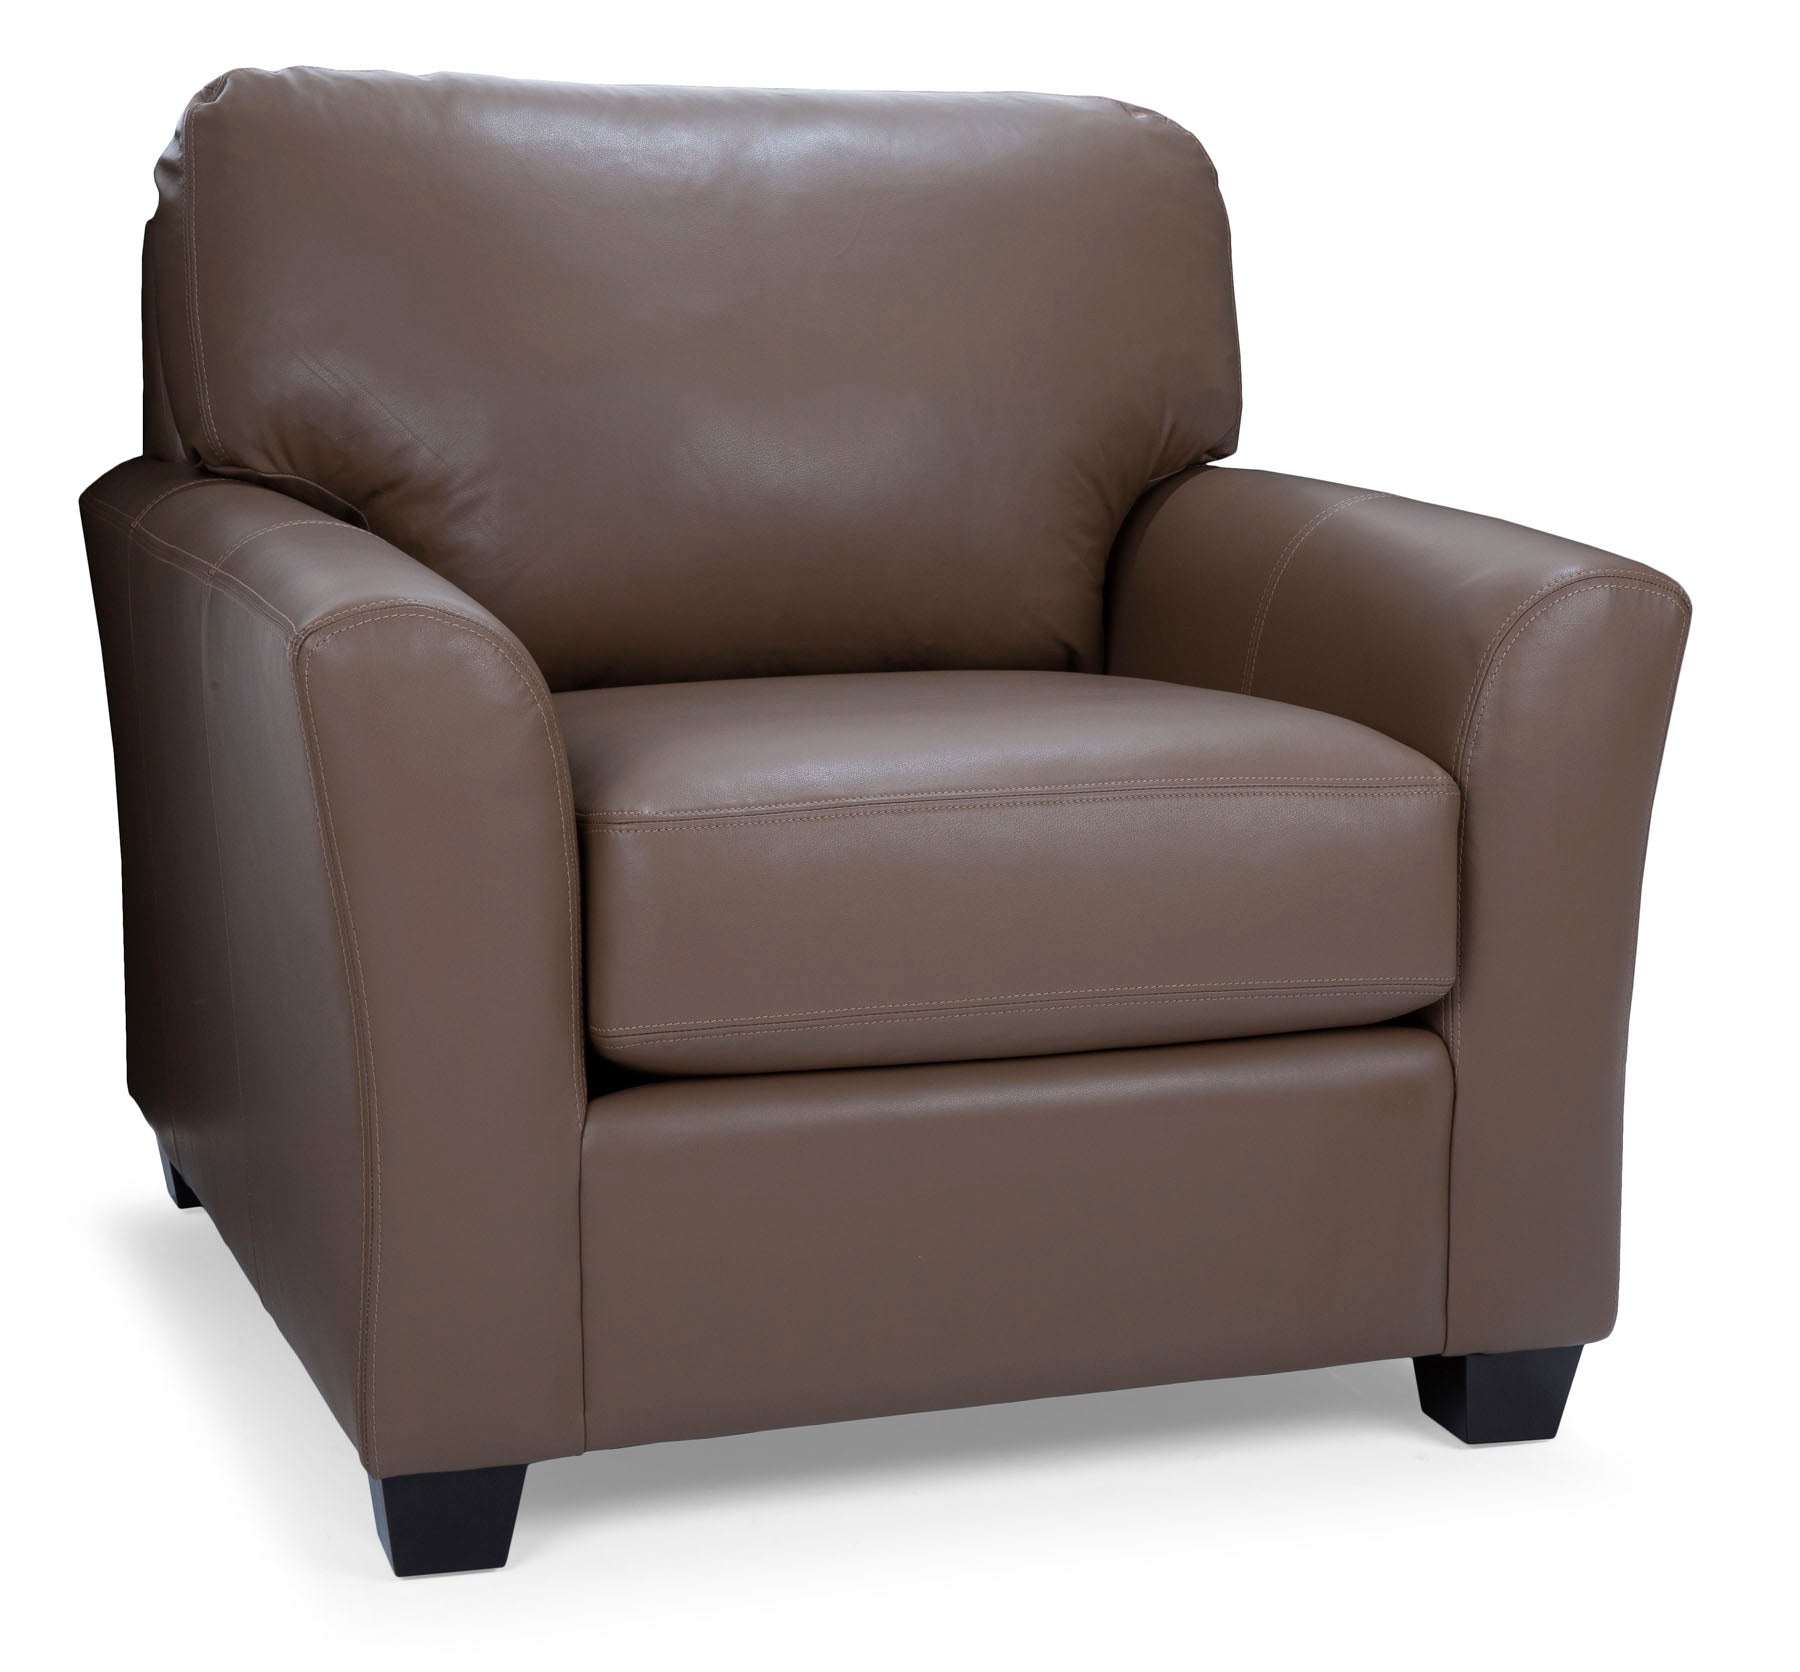 Alessandra Leather Chair - MJM Furniture